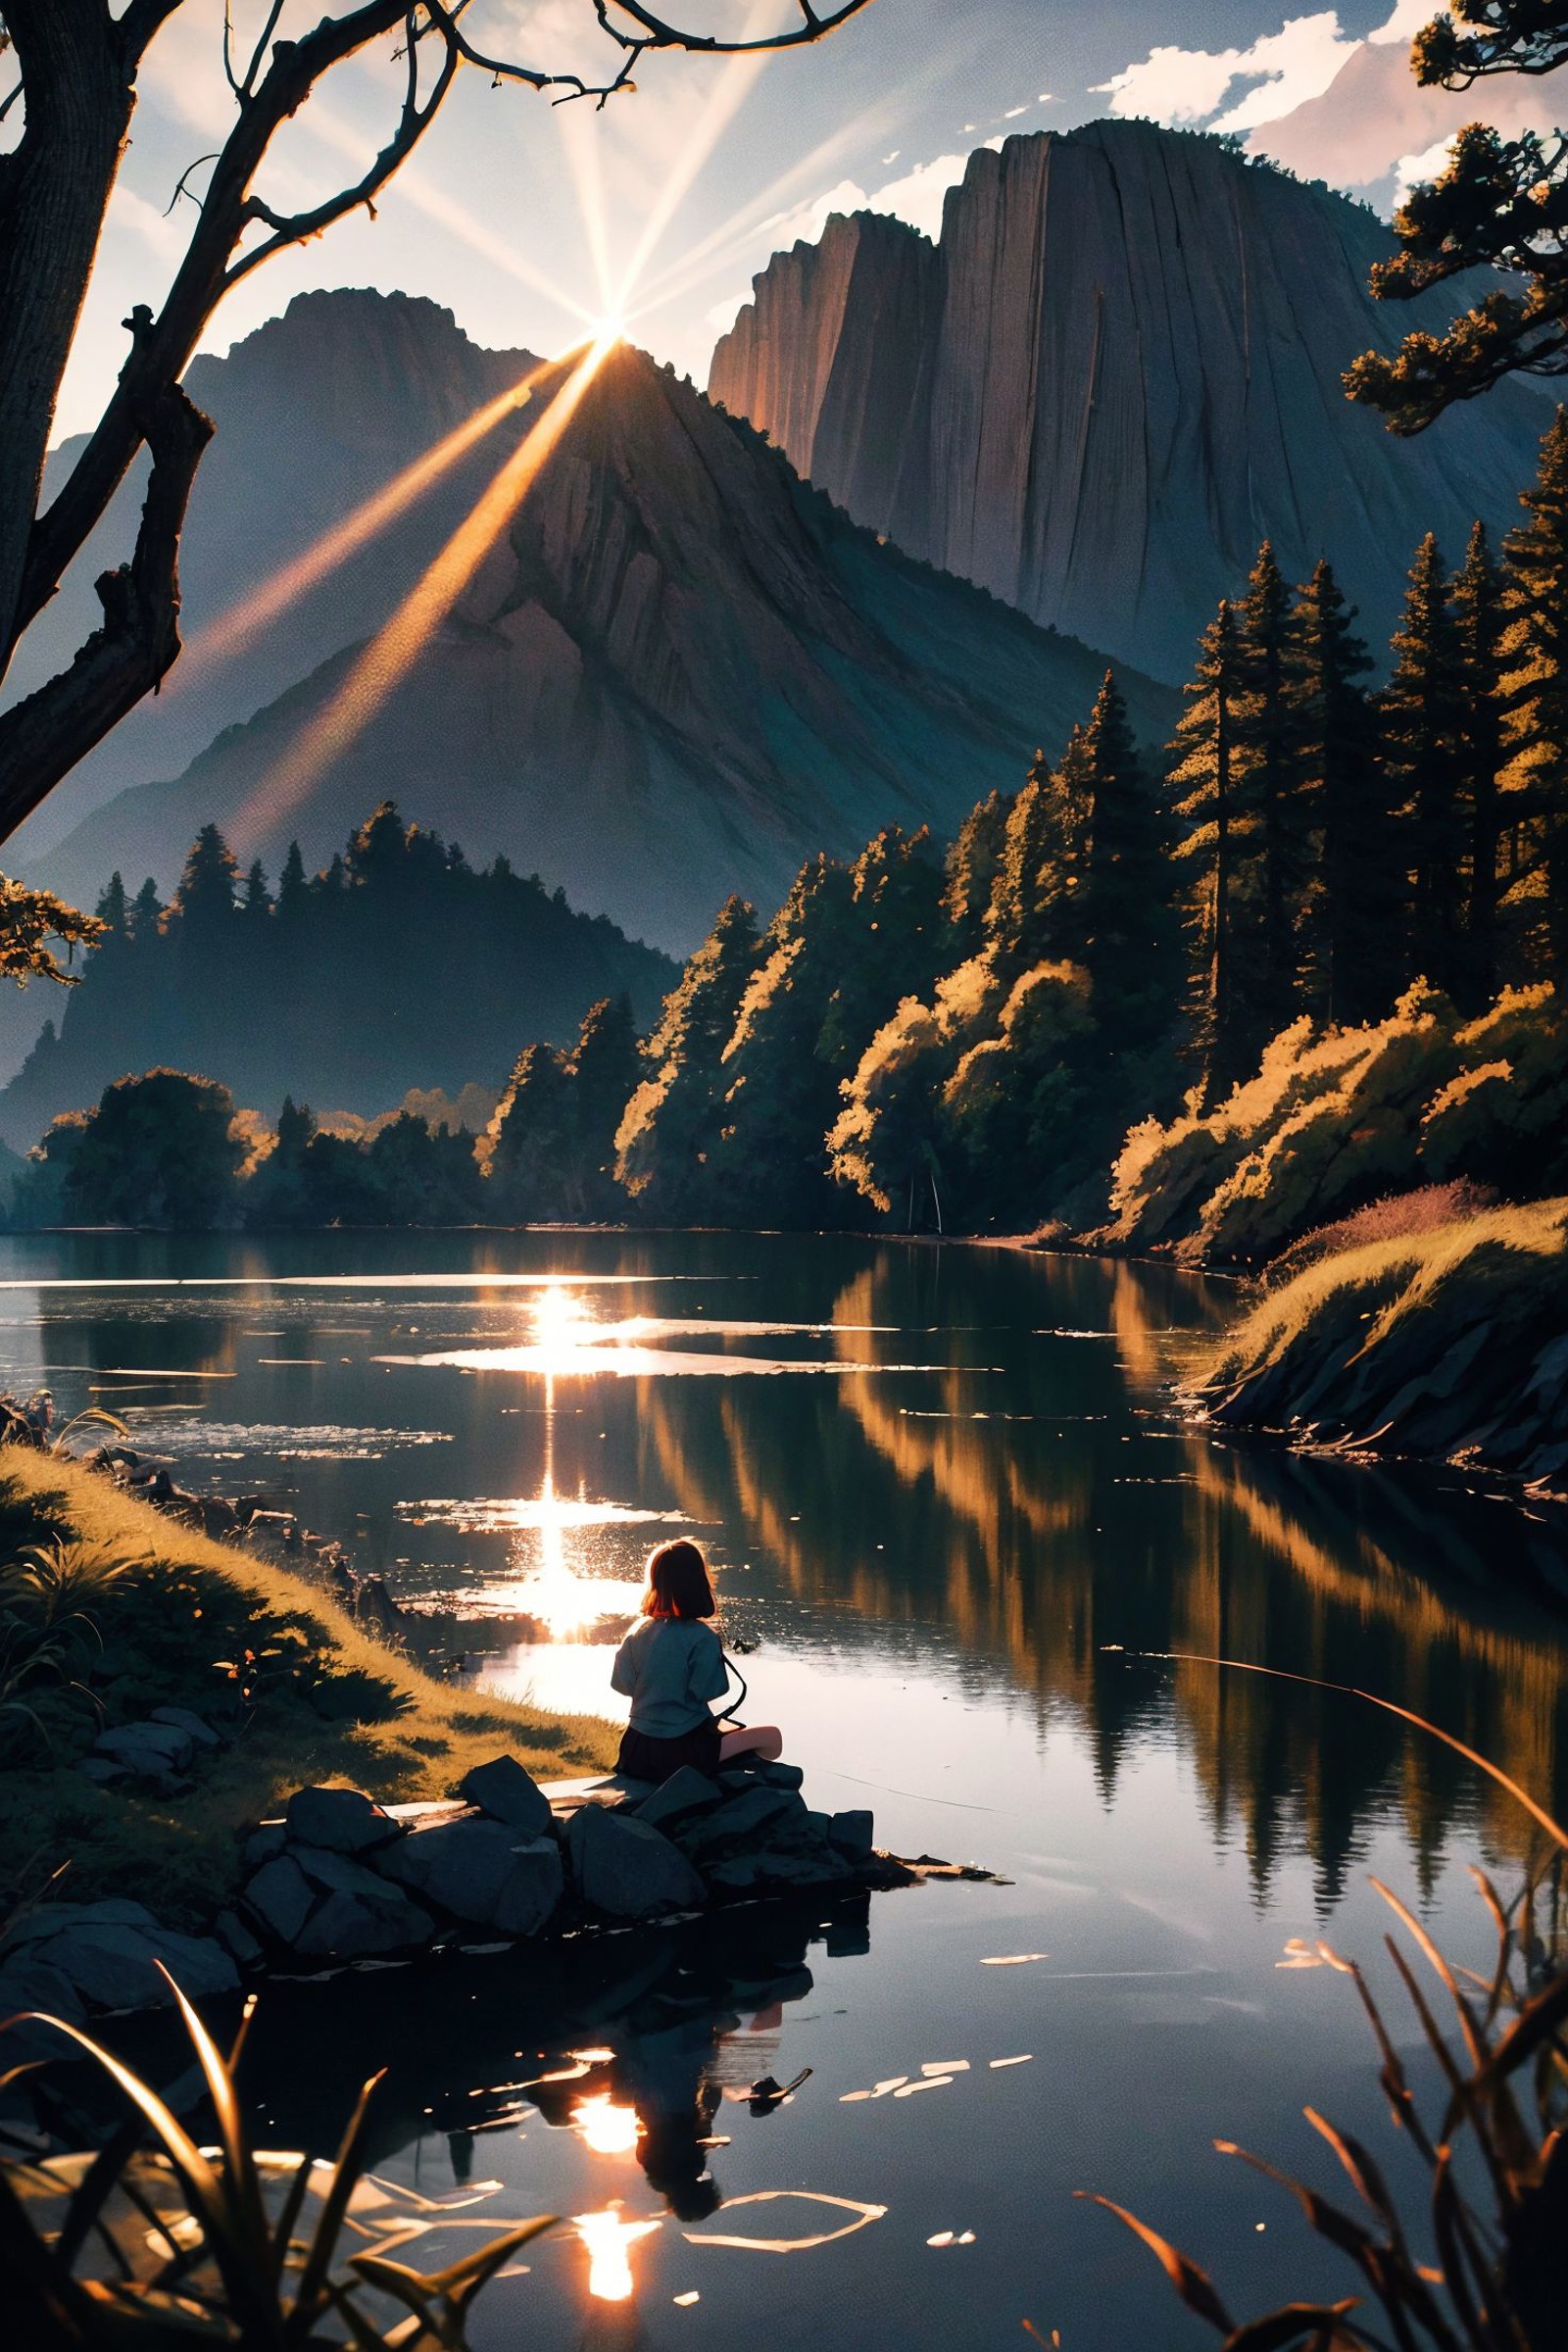 The golden hour lighting up a serene lake in an old,worn village,Ansel Adams style whimsical creatures playing in the gard...